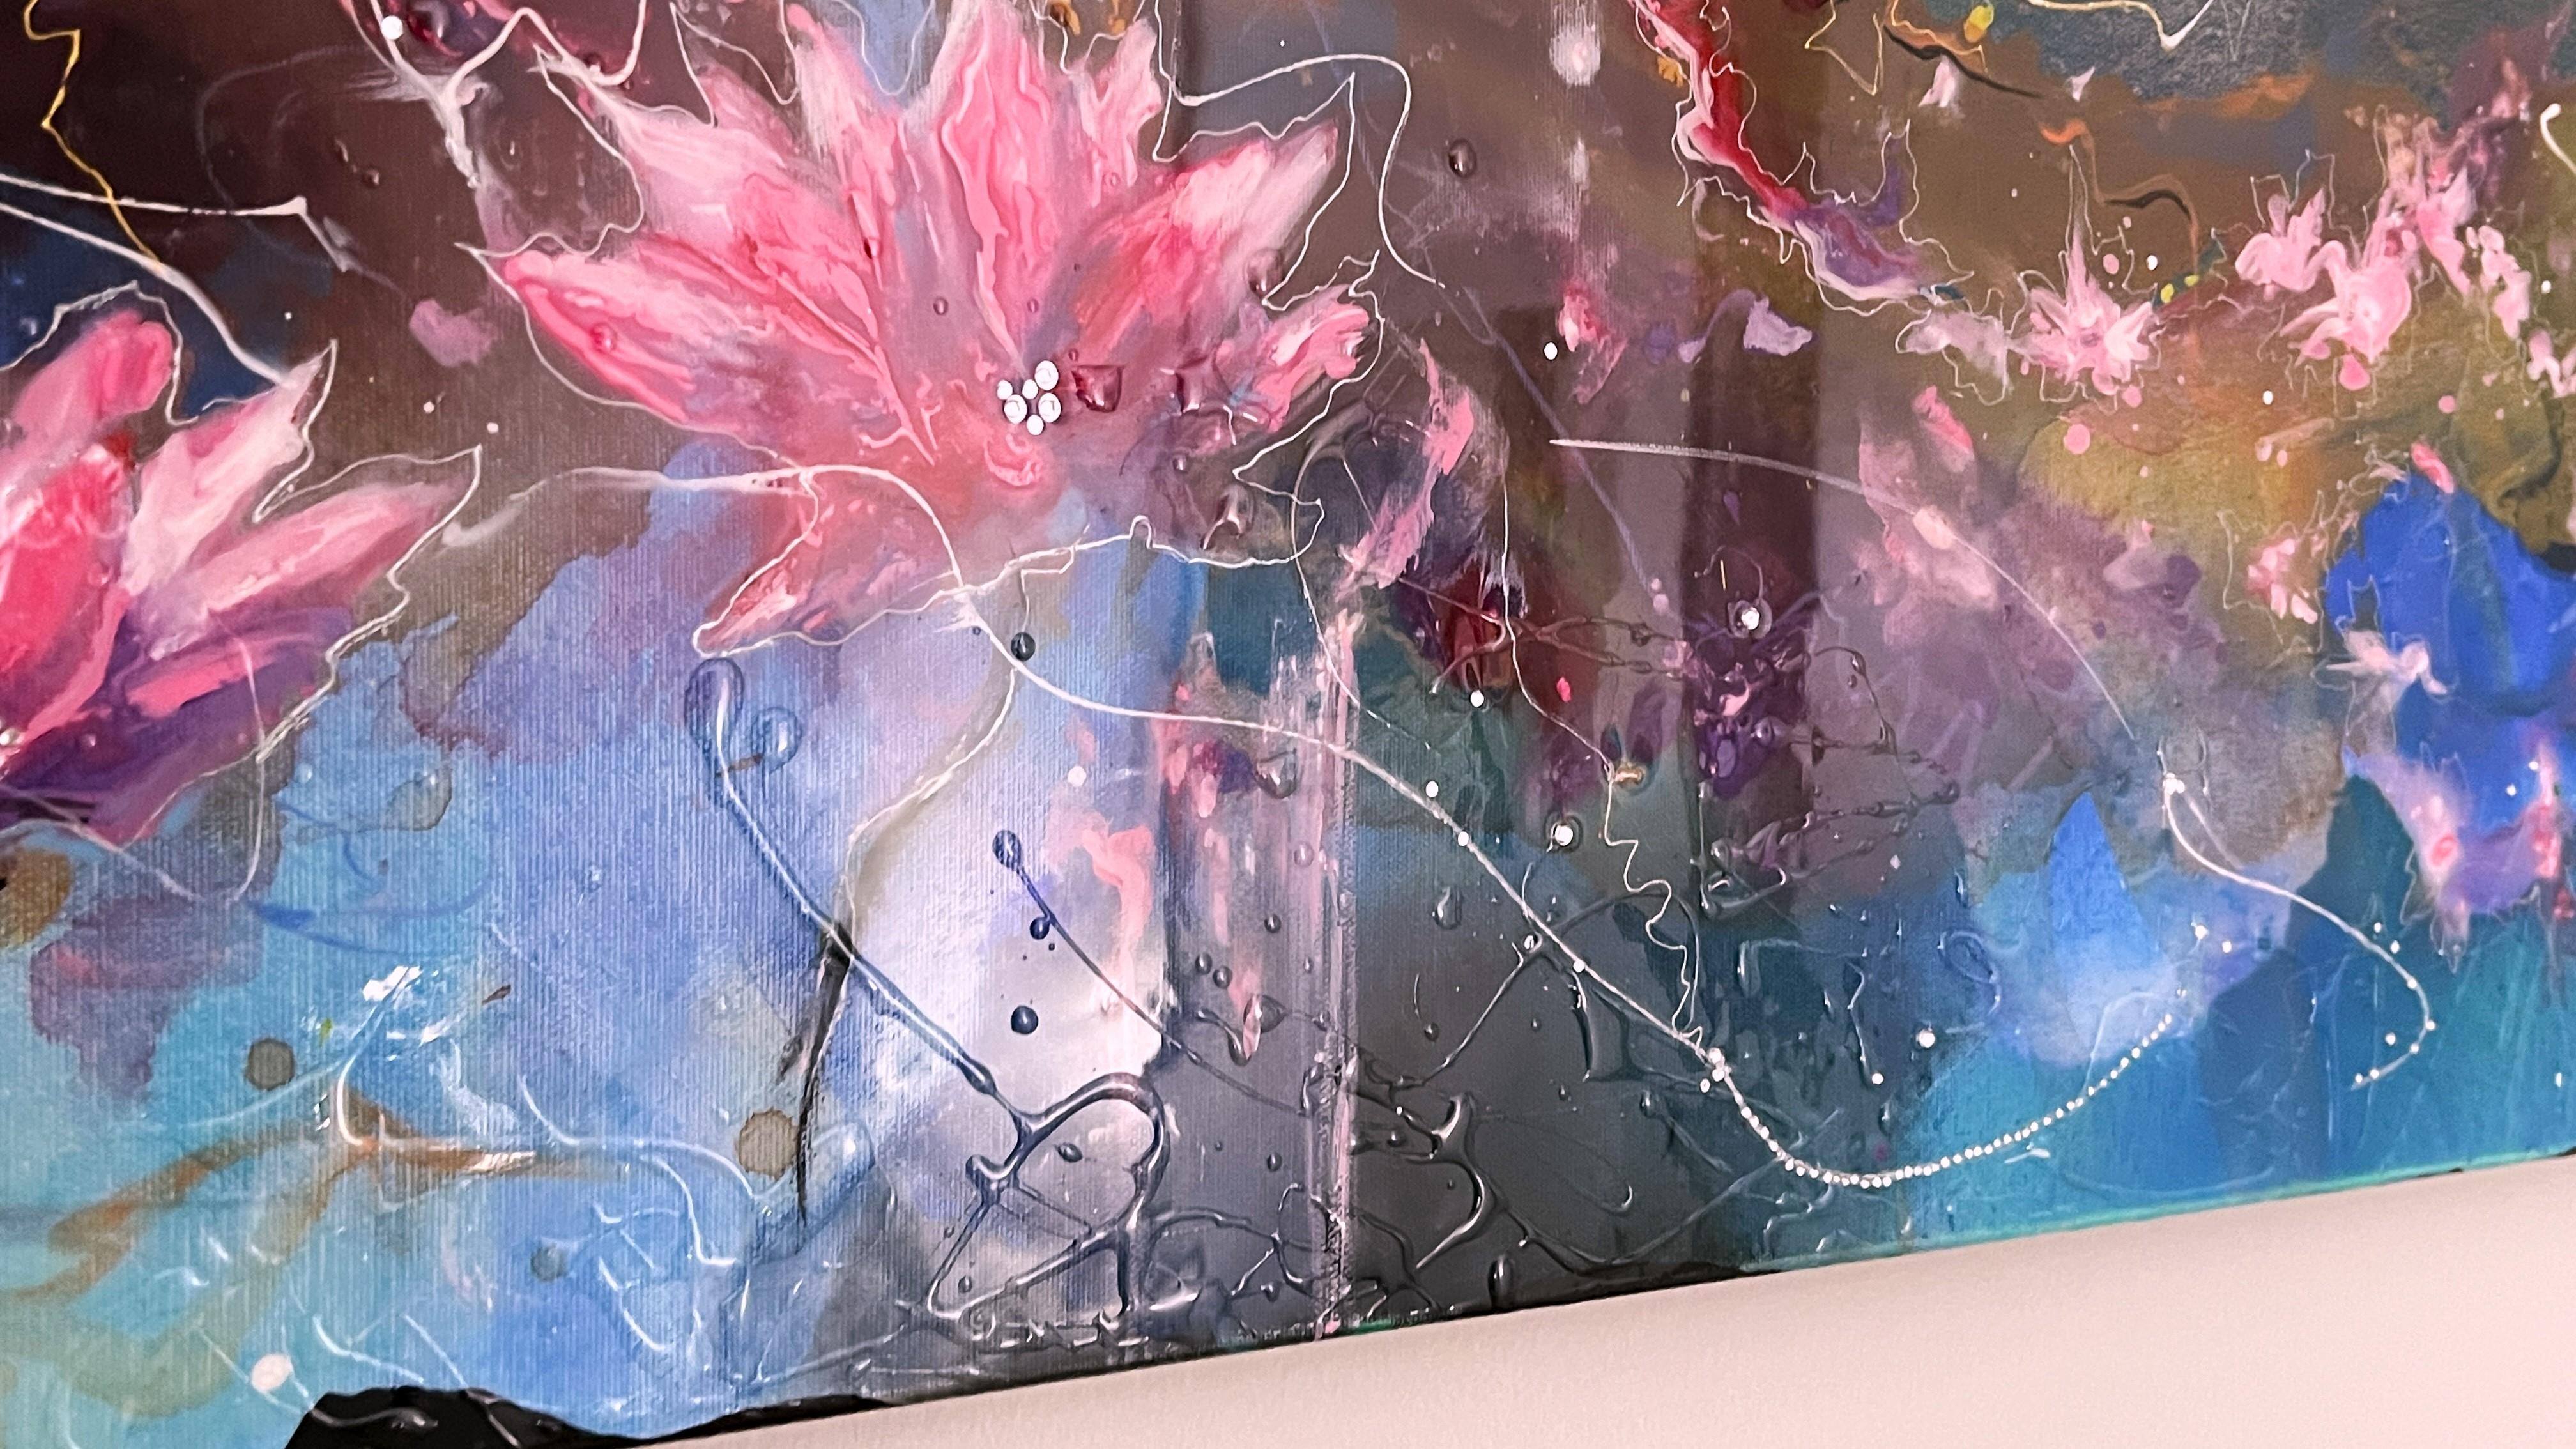 This is an impulsive abstraction with water lilies and a waltz rhythm.
The artist Lana Ritter has created an expressive floral chaotic abstraction. She tries to incorporate organic subjects, flowers, and animals in her abstract conception. The